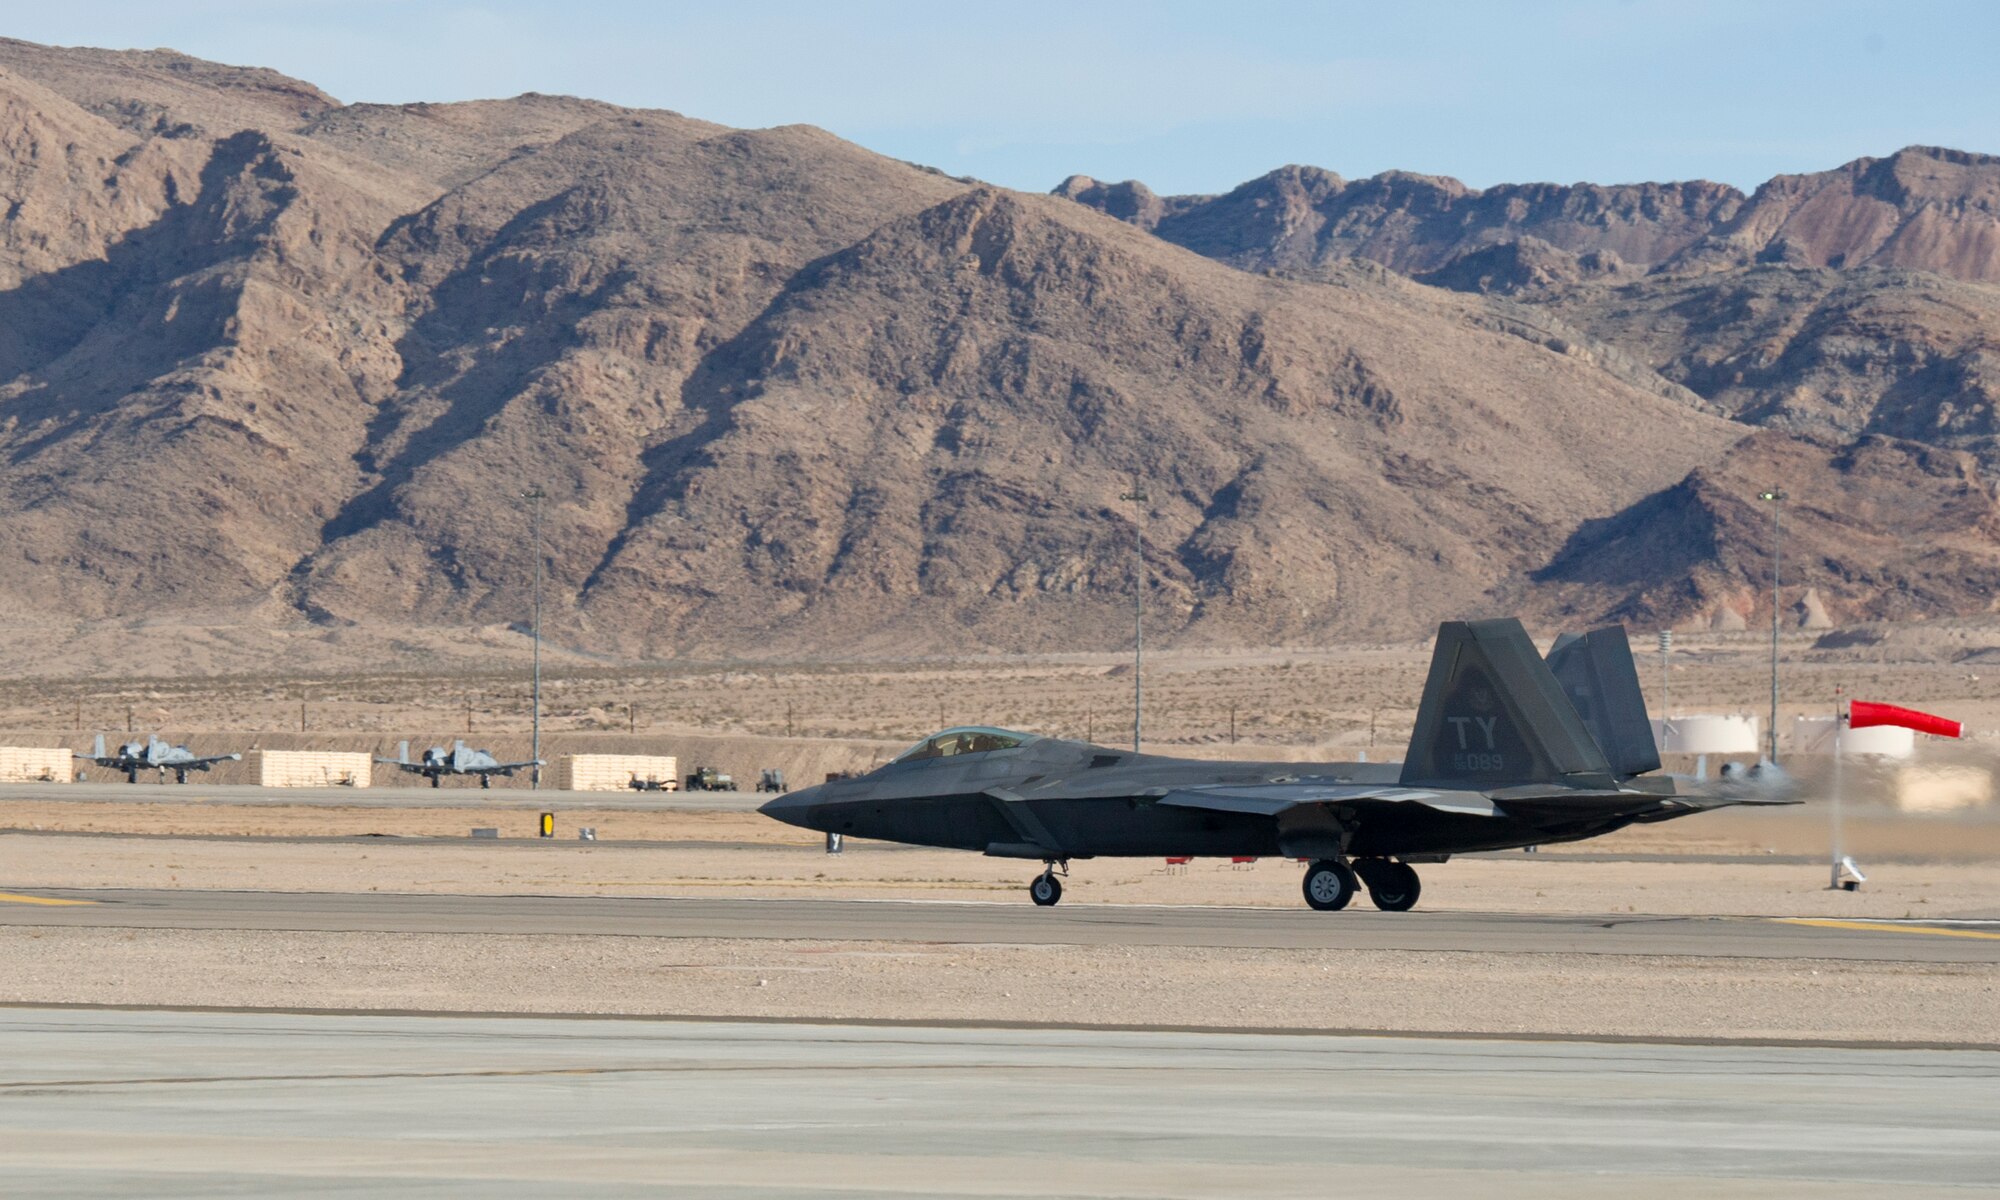 An F-22 Raptor assigned to the 95th Fighter Squadron, Tyndall AFB, Fla. takes off on the first day of Red Flag 16-1, Jan. 25 on the Nellis AFB, Nev. flightline. Tyndall’s F-22 Raptors bring a lot to the exercise as the jet’s stealth capabilities, advanced avionics, communication and sensory capabilities help augment the capabilities of the other aircraft. (U.S. Air Force photo by Senior Airman Alex Fox Echols III/Released)  